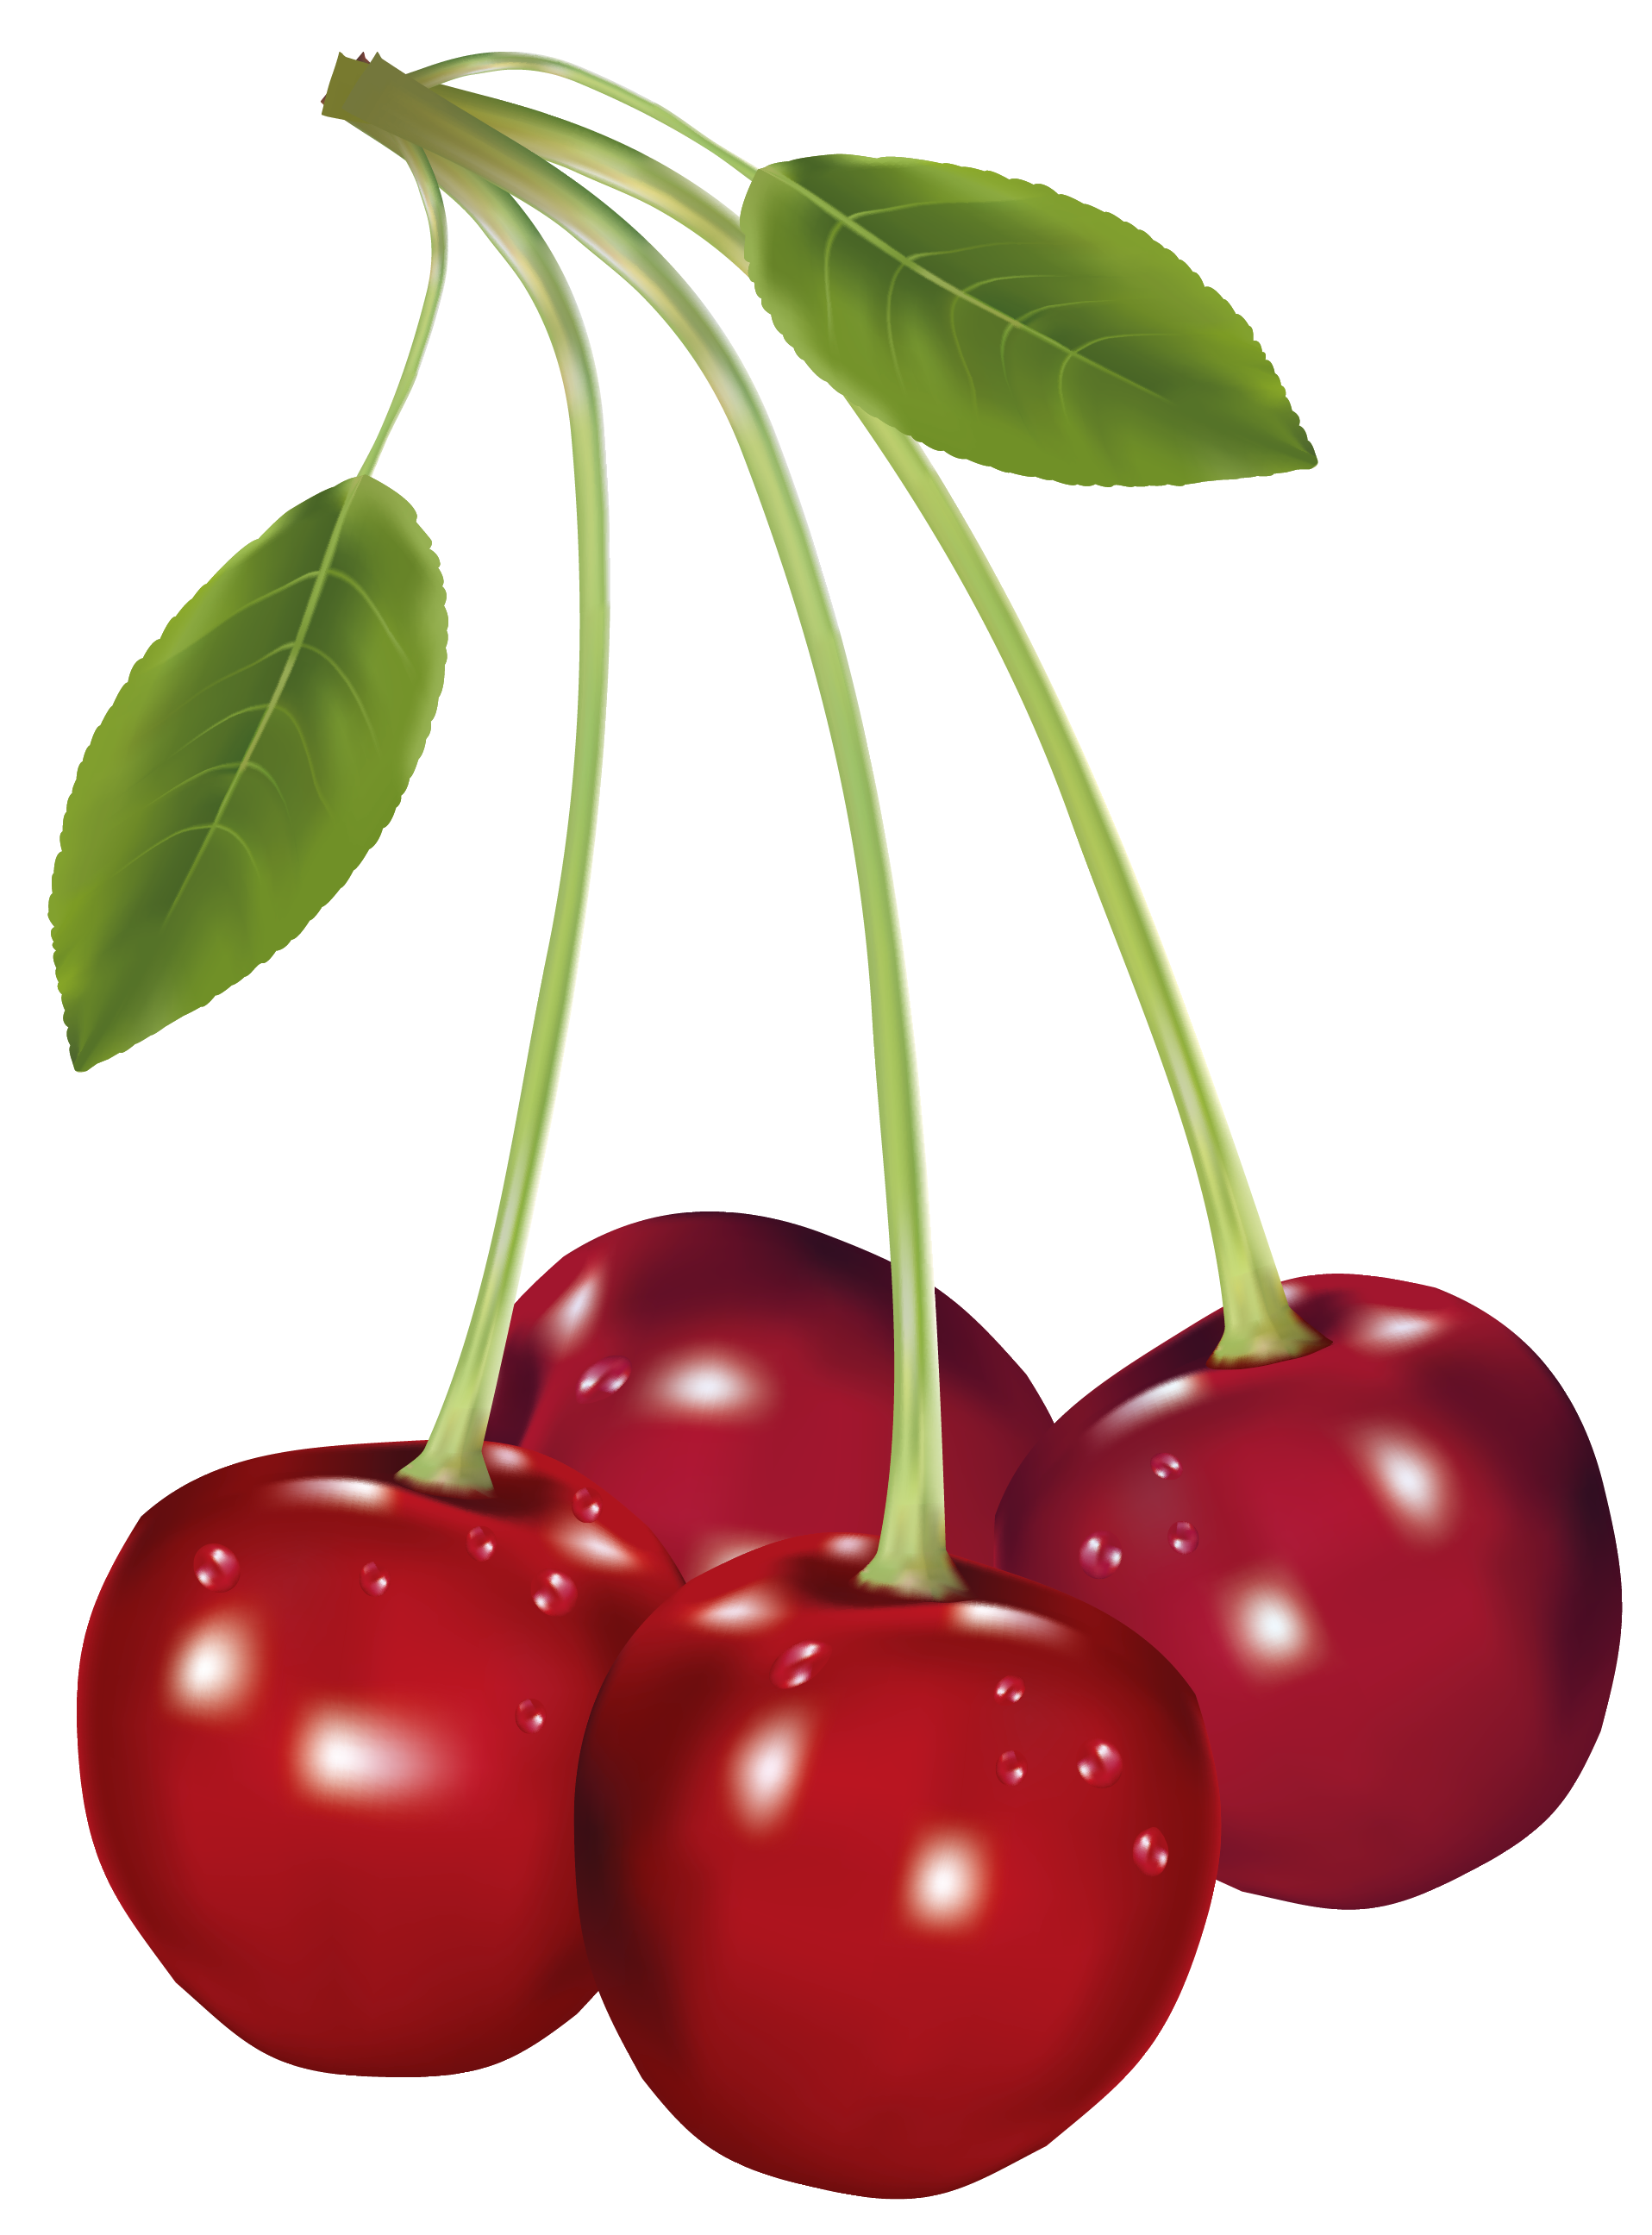 Free clipart fruit. Cherries png picture gallery